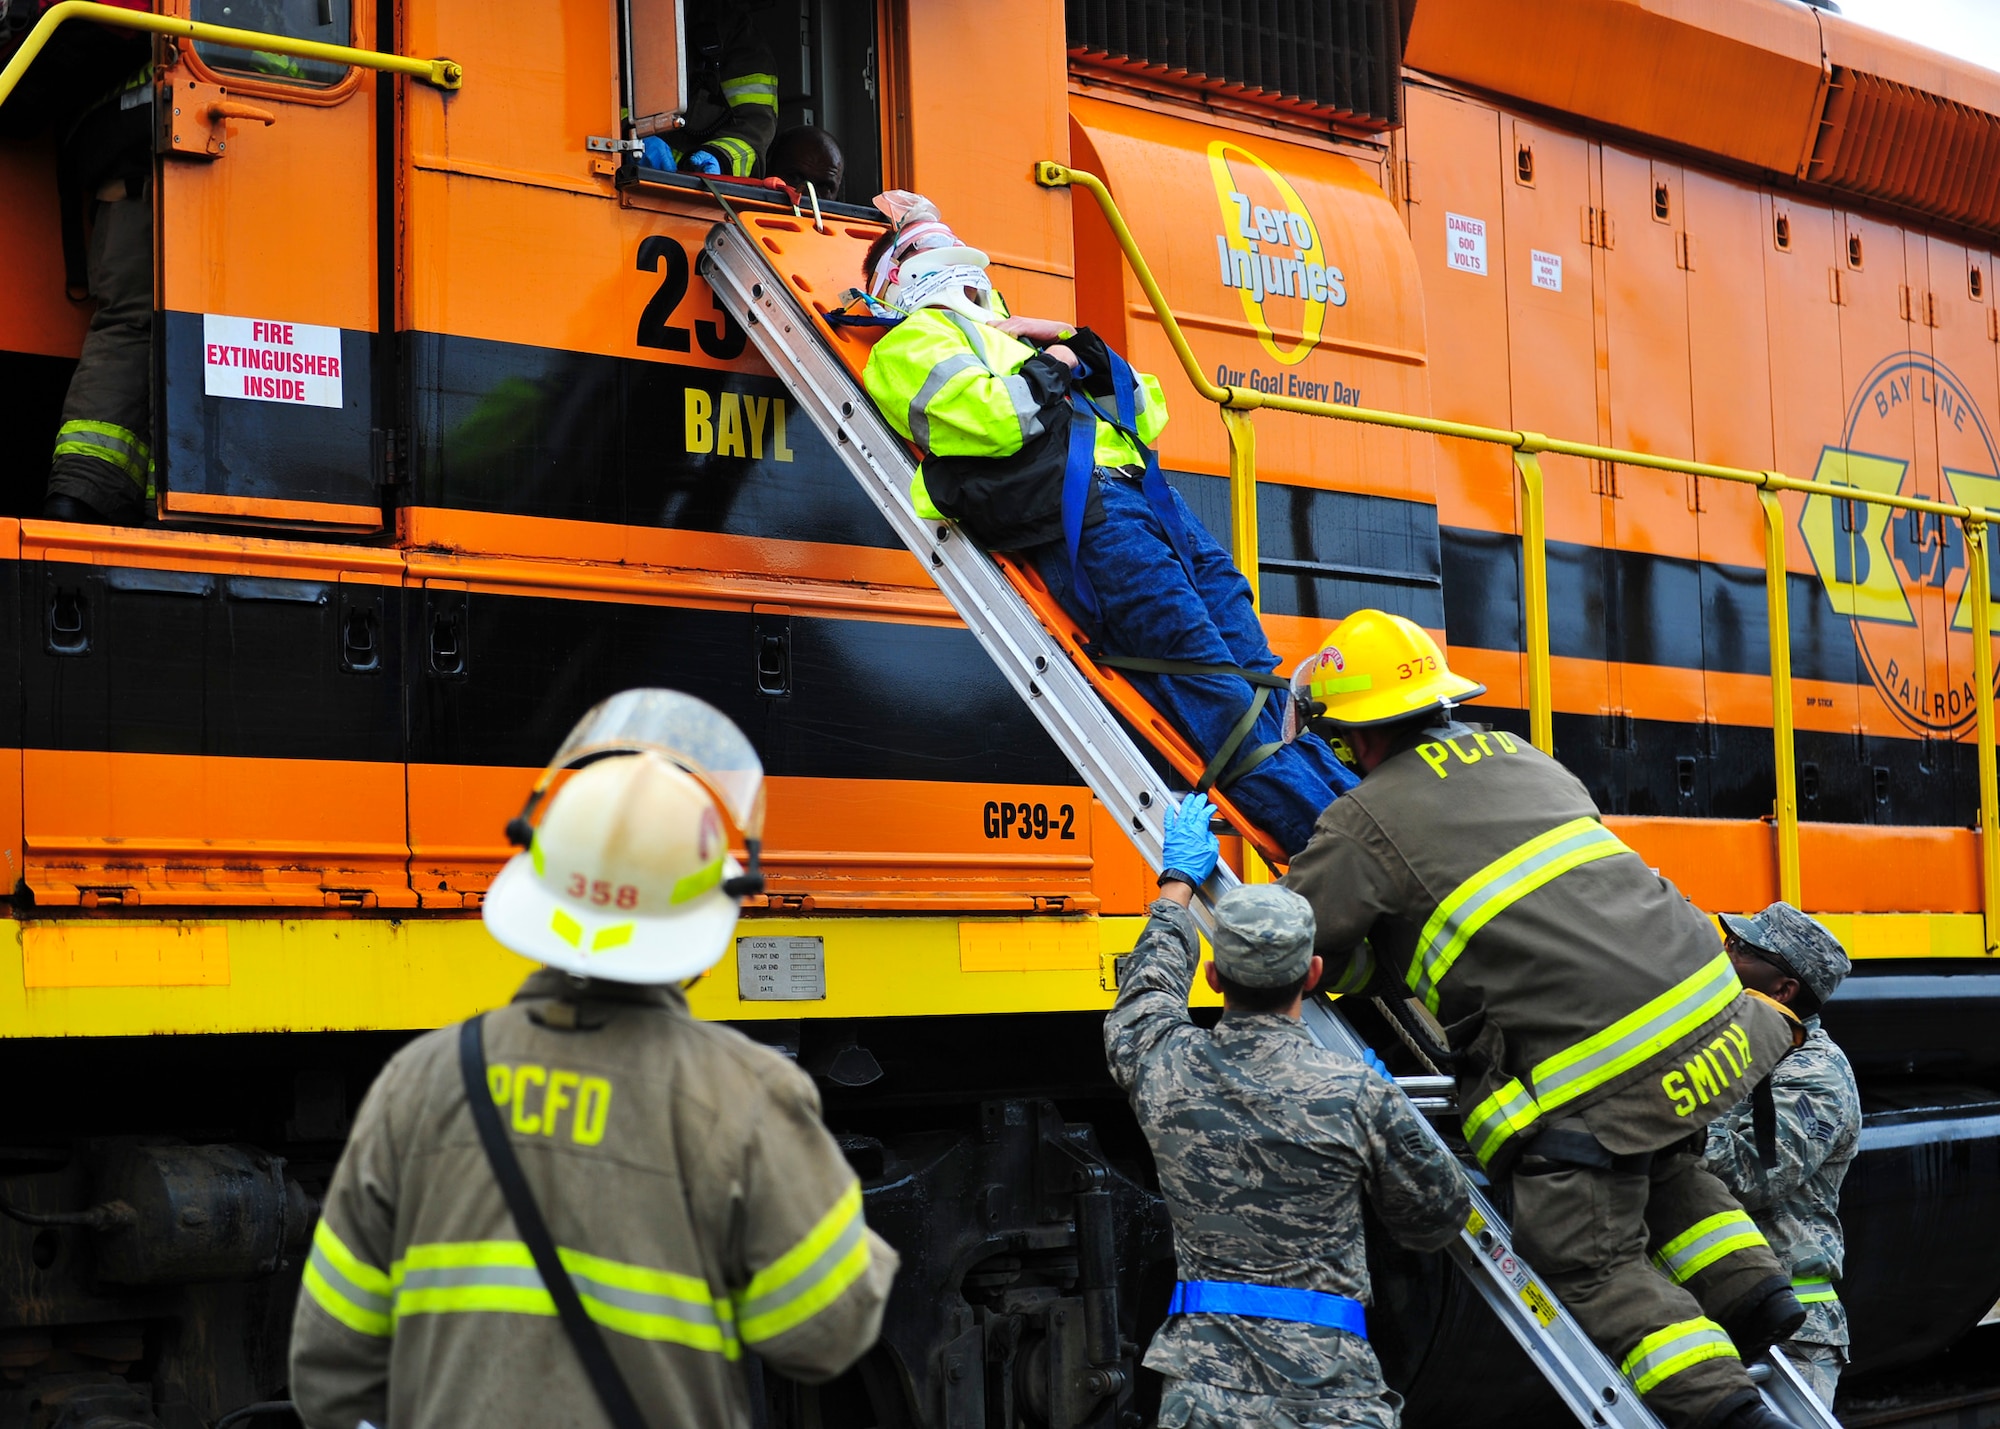 An injured person is removed from a locomotive during a training exercise Dec. 17 at the Panama City Bay Line Railroad. During this exercise, Tyndall Airmen were embedded into their civilian counterpart’s units to work hand-in-hand and promote lateral learning on how they would both handle the incidents. (U.S. Air Force photo by Senior Airman Dustin Mullen/Released) 